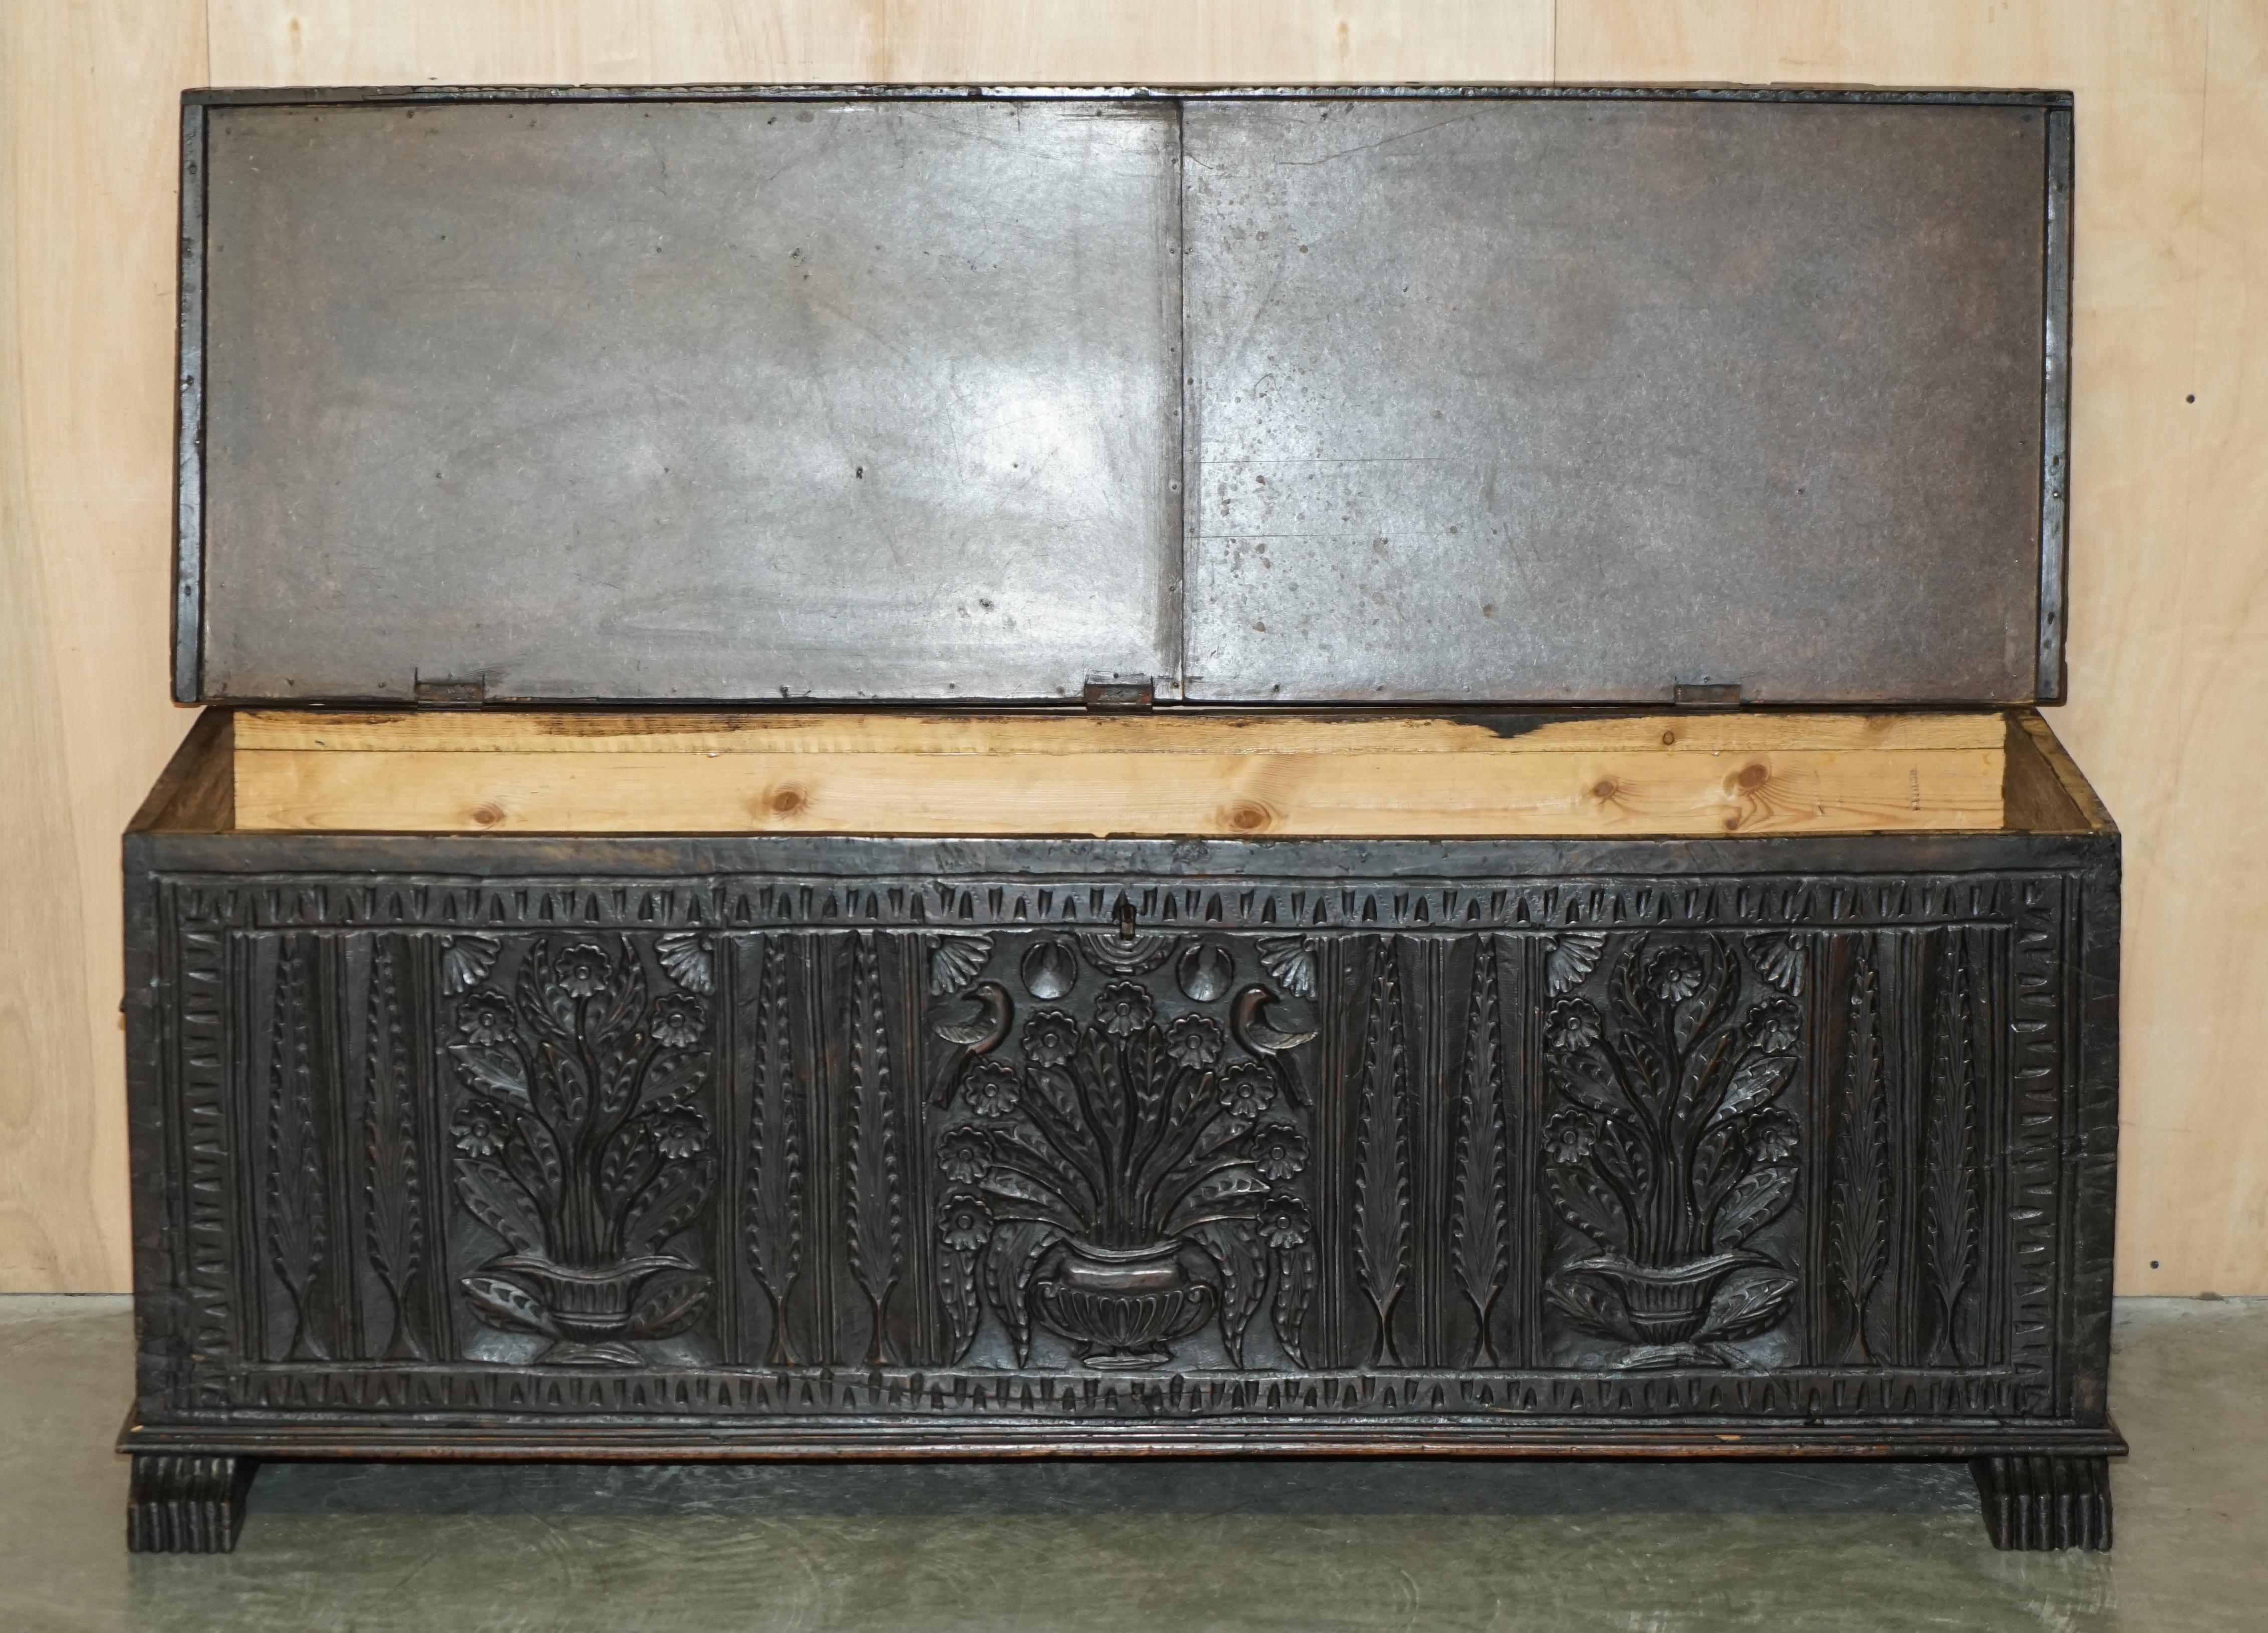 ANTIQUE 19TH CENTURY JACOBEAN REViVAL HAND CARVED TRUNK CHEST OTTOMAN For Sale 12